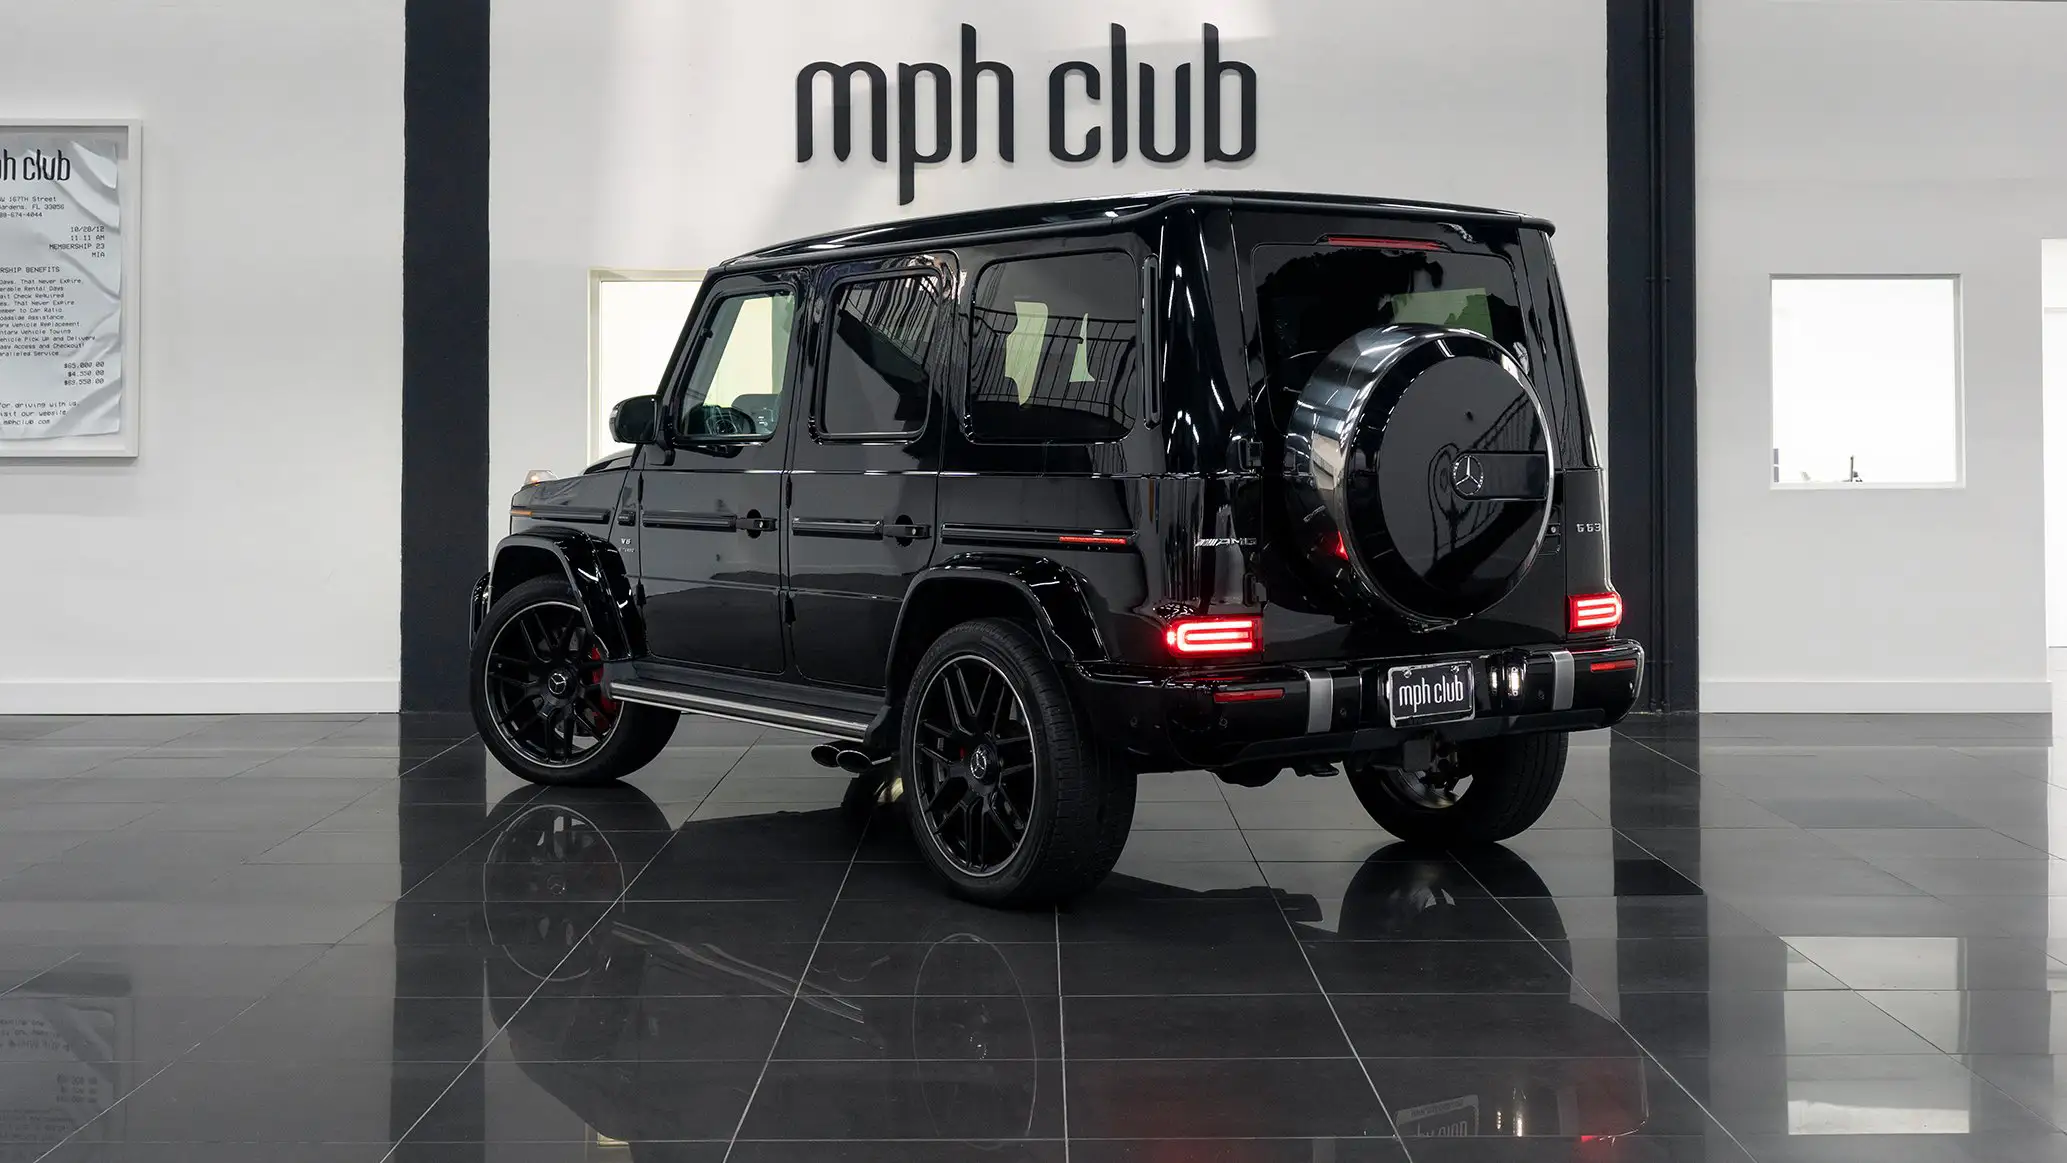 2020 black on white mercedes benz amg g63 for sale mph club 2